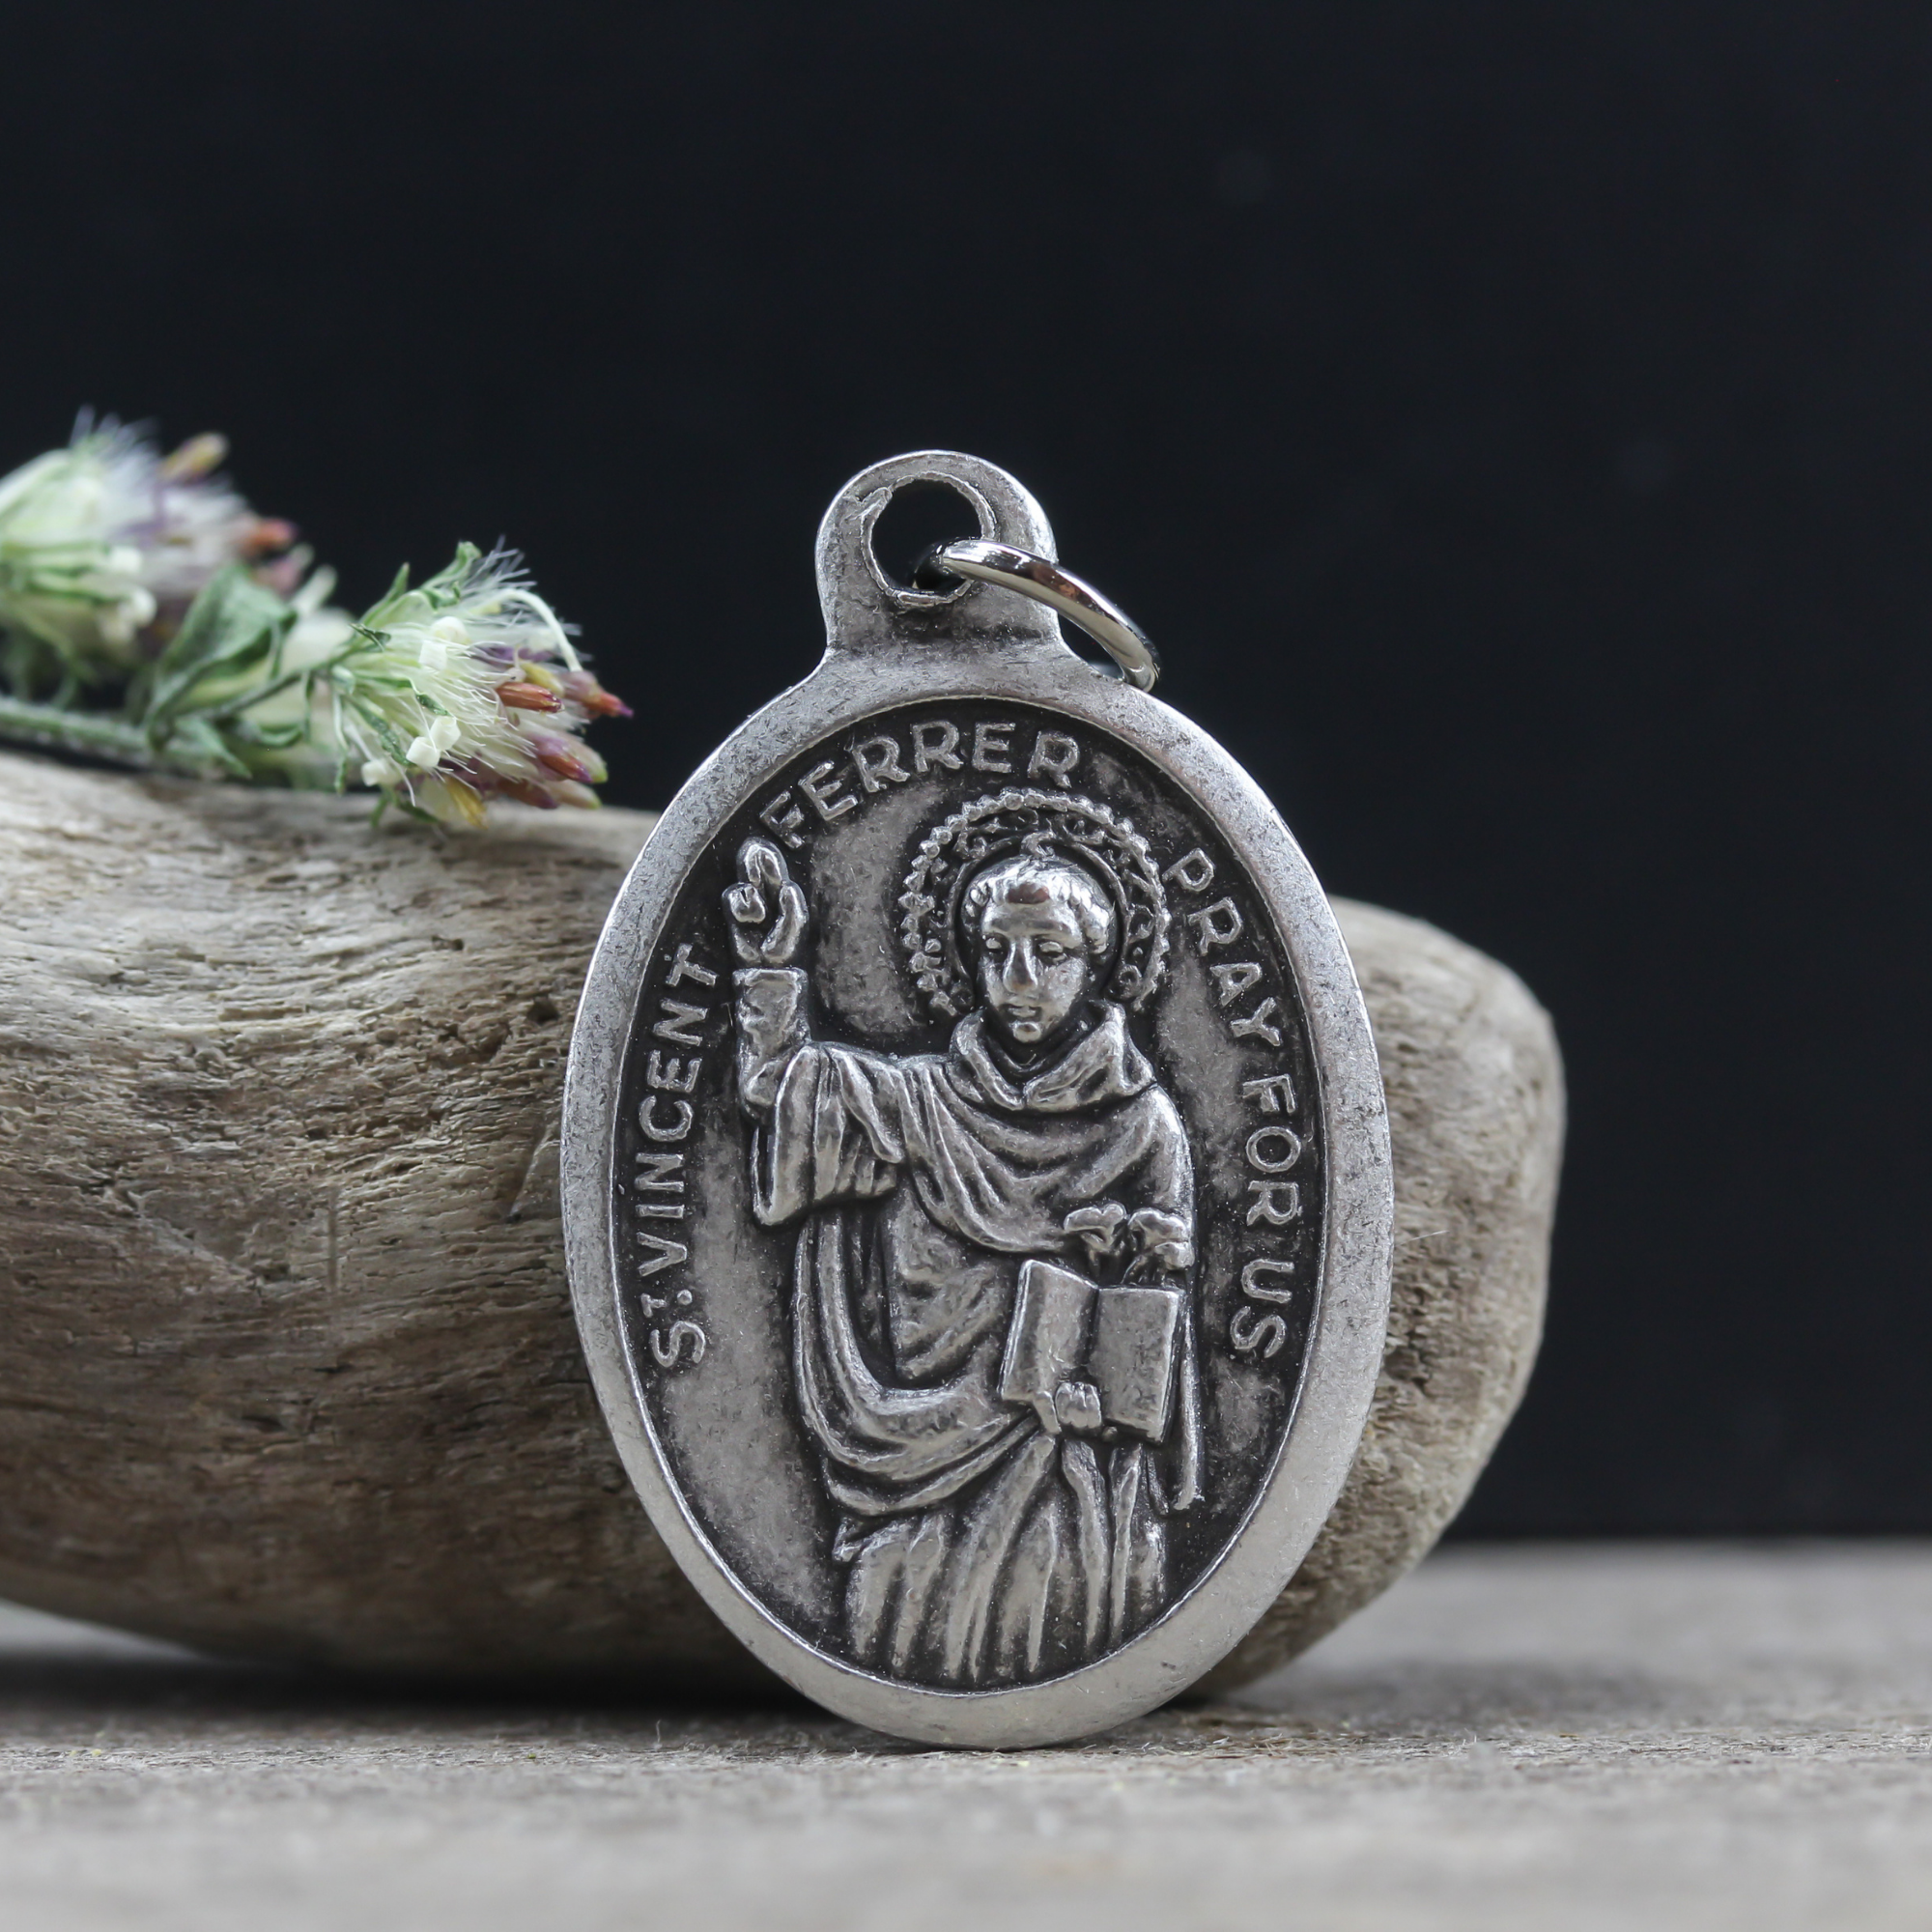 St. Vincent ferer silver oxidized one inch oval religious medal